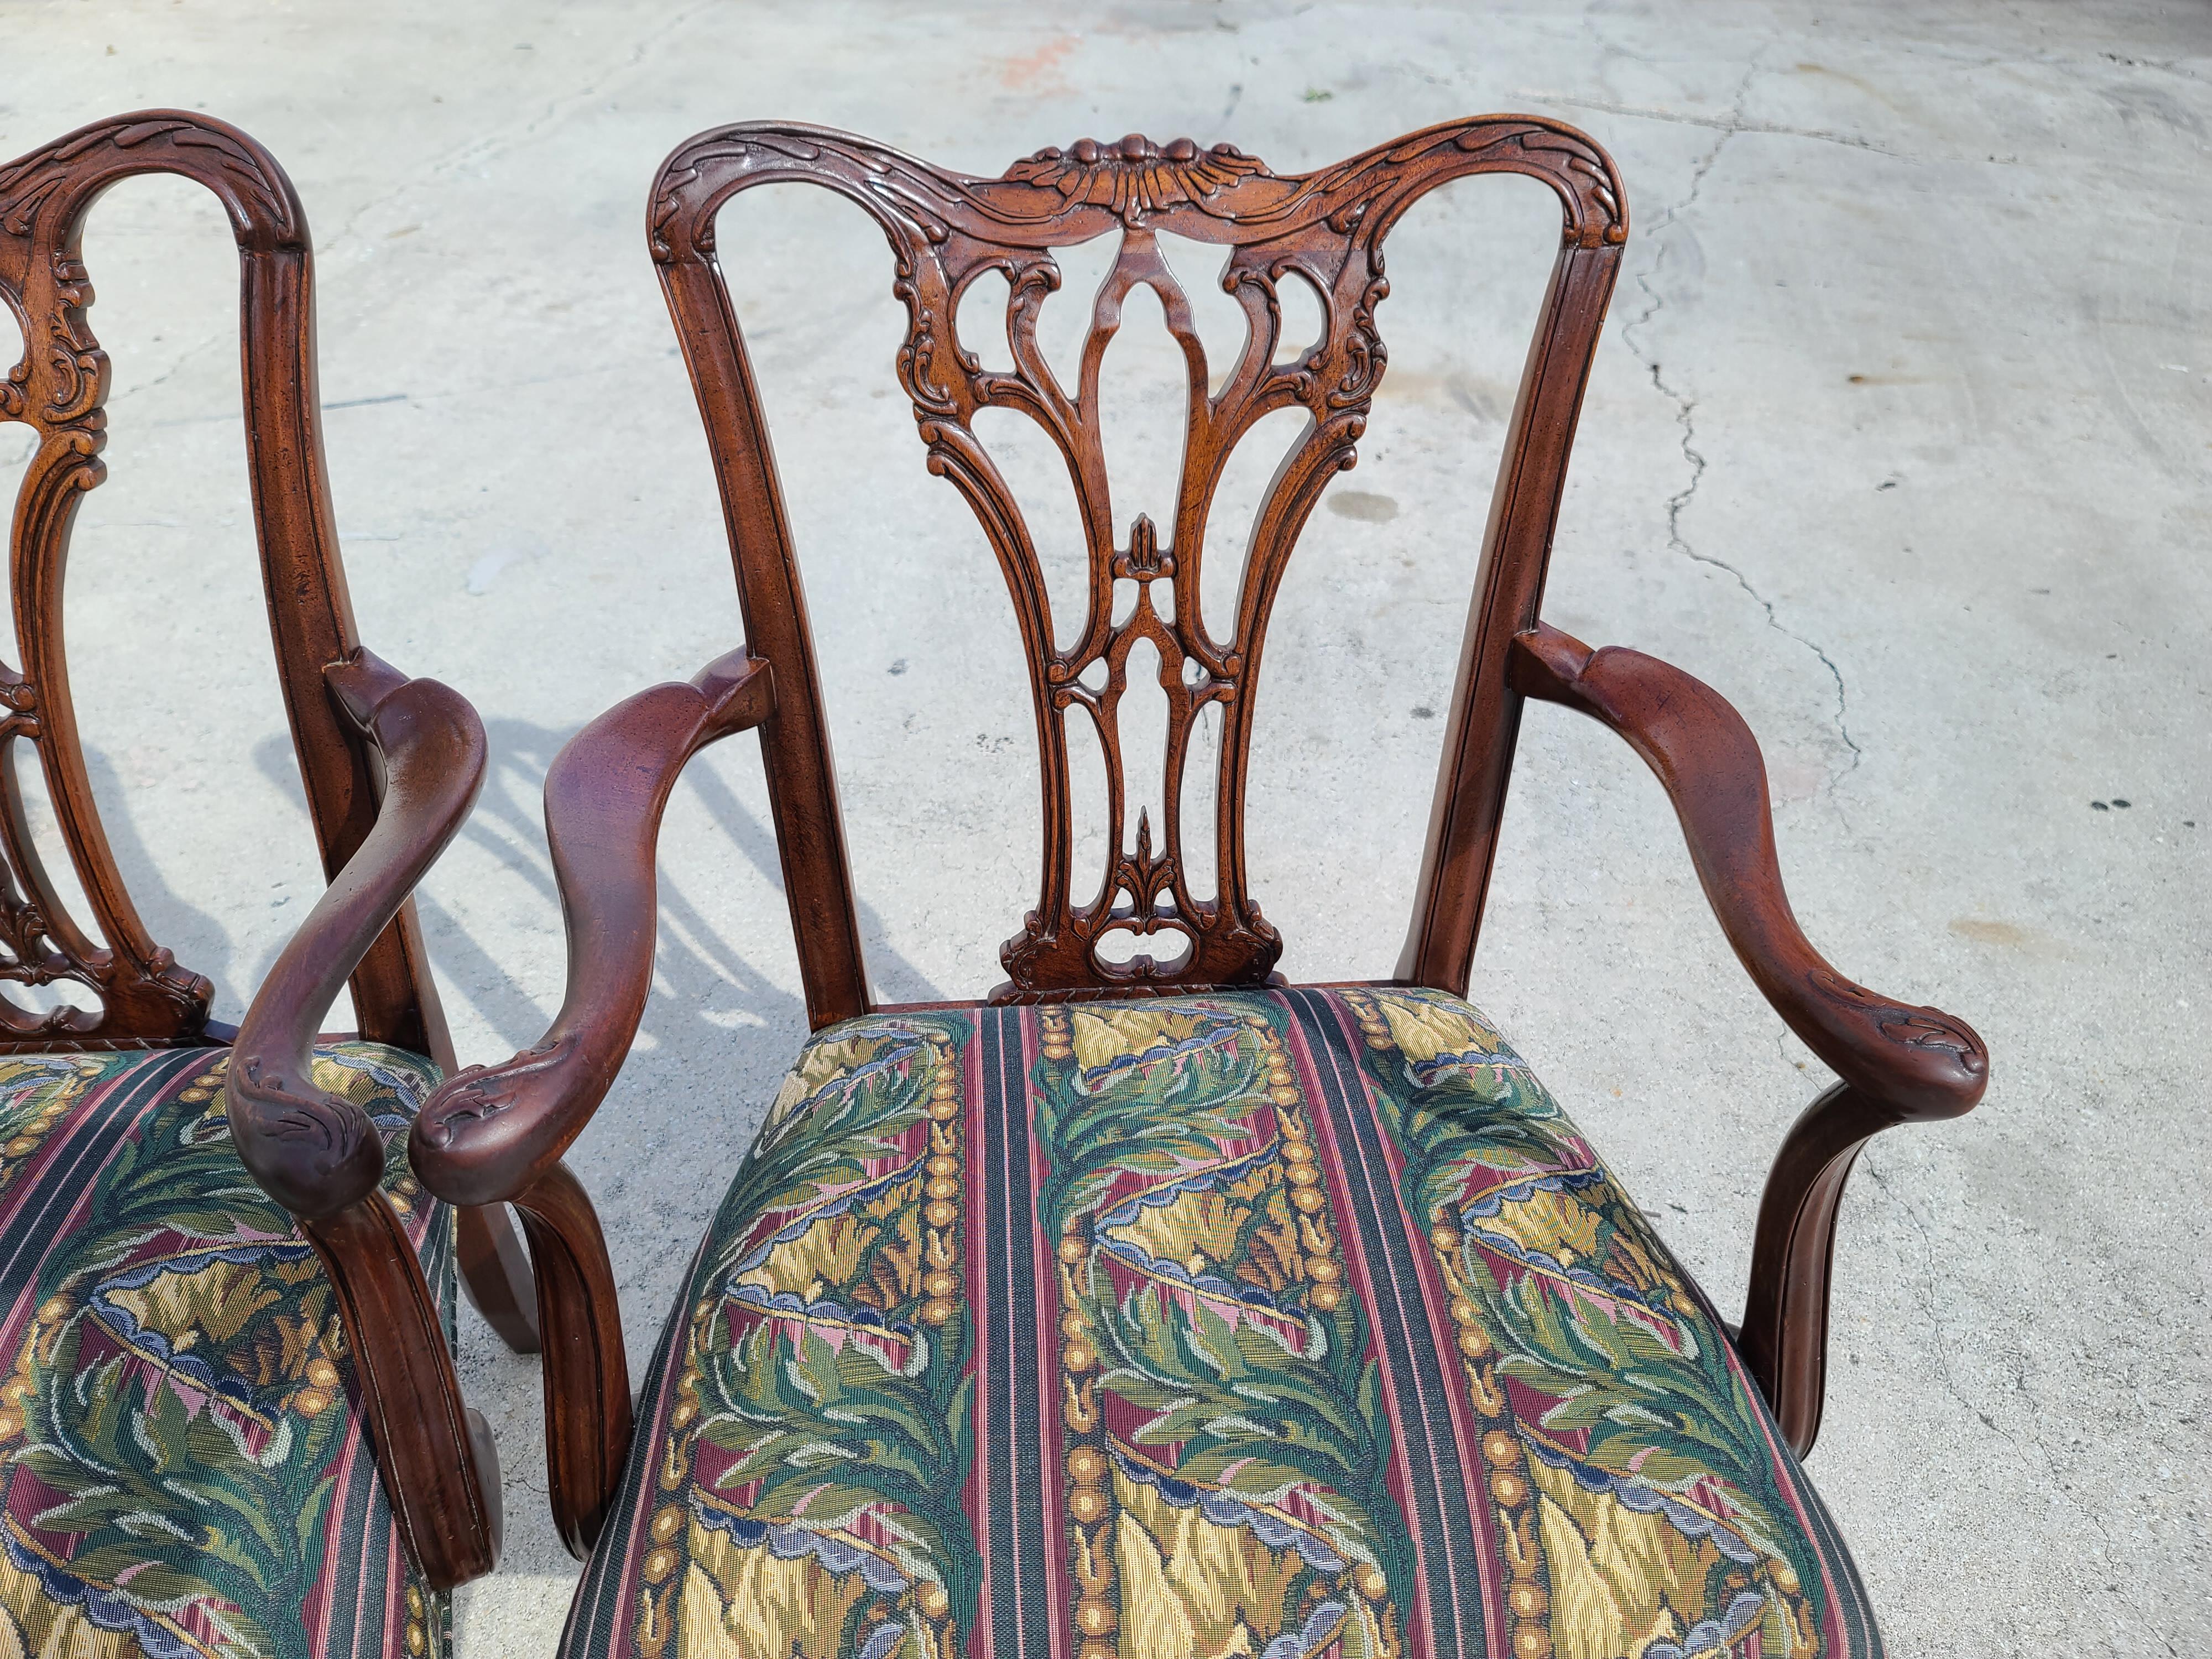 Antique C 1900 Edwardian Chippendale Mahogany Ball & Claw Armchairs, a Pair In Good Condition For Sale In Lake Worth, FL